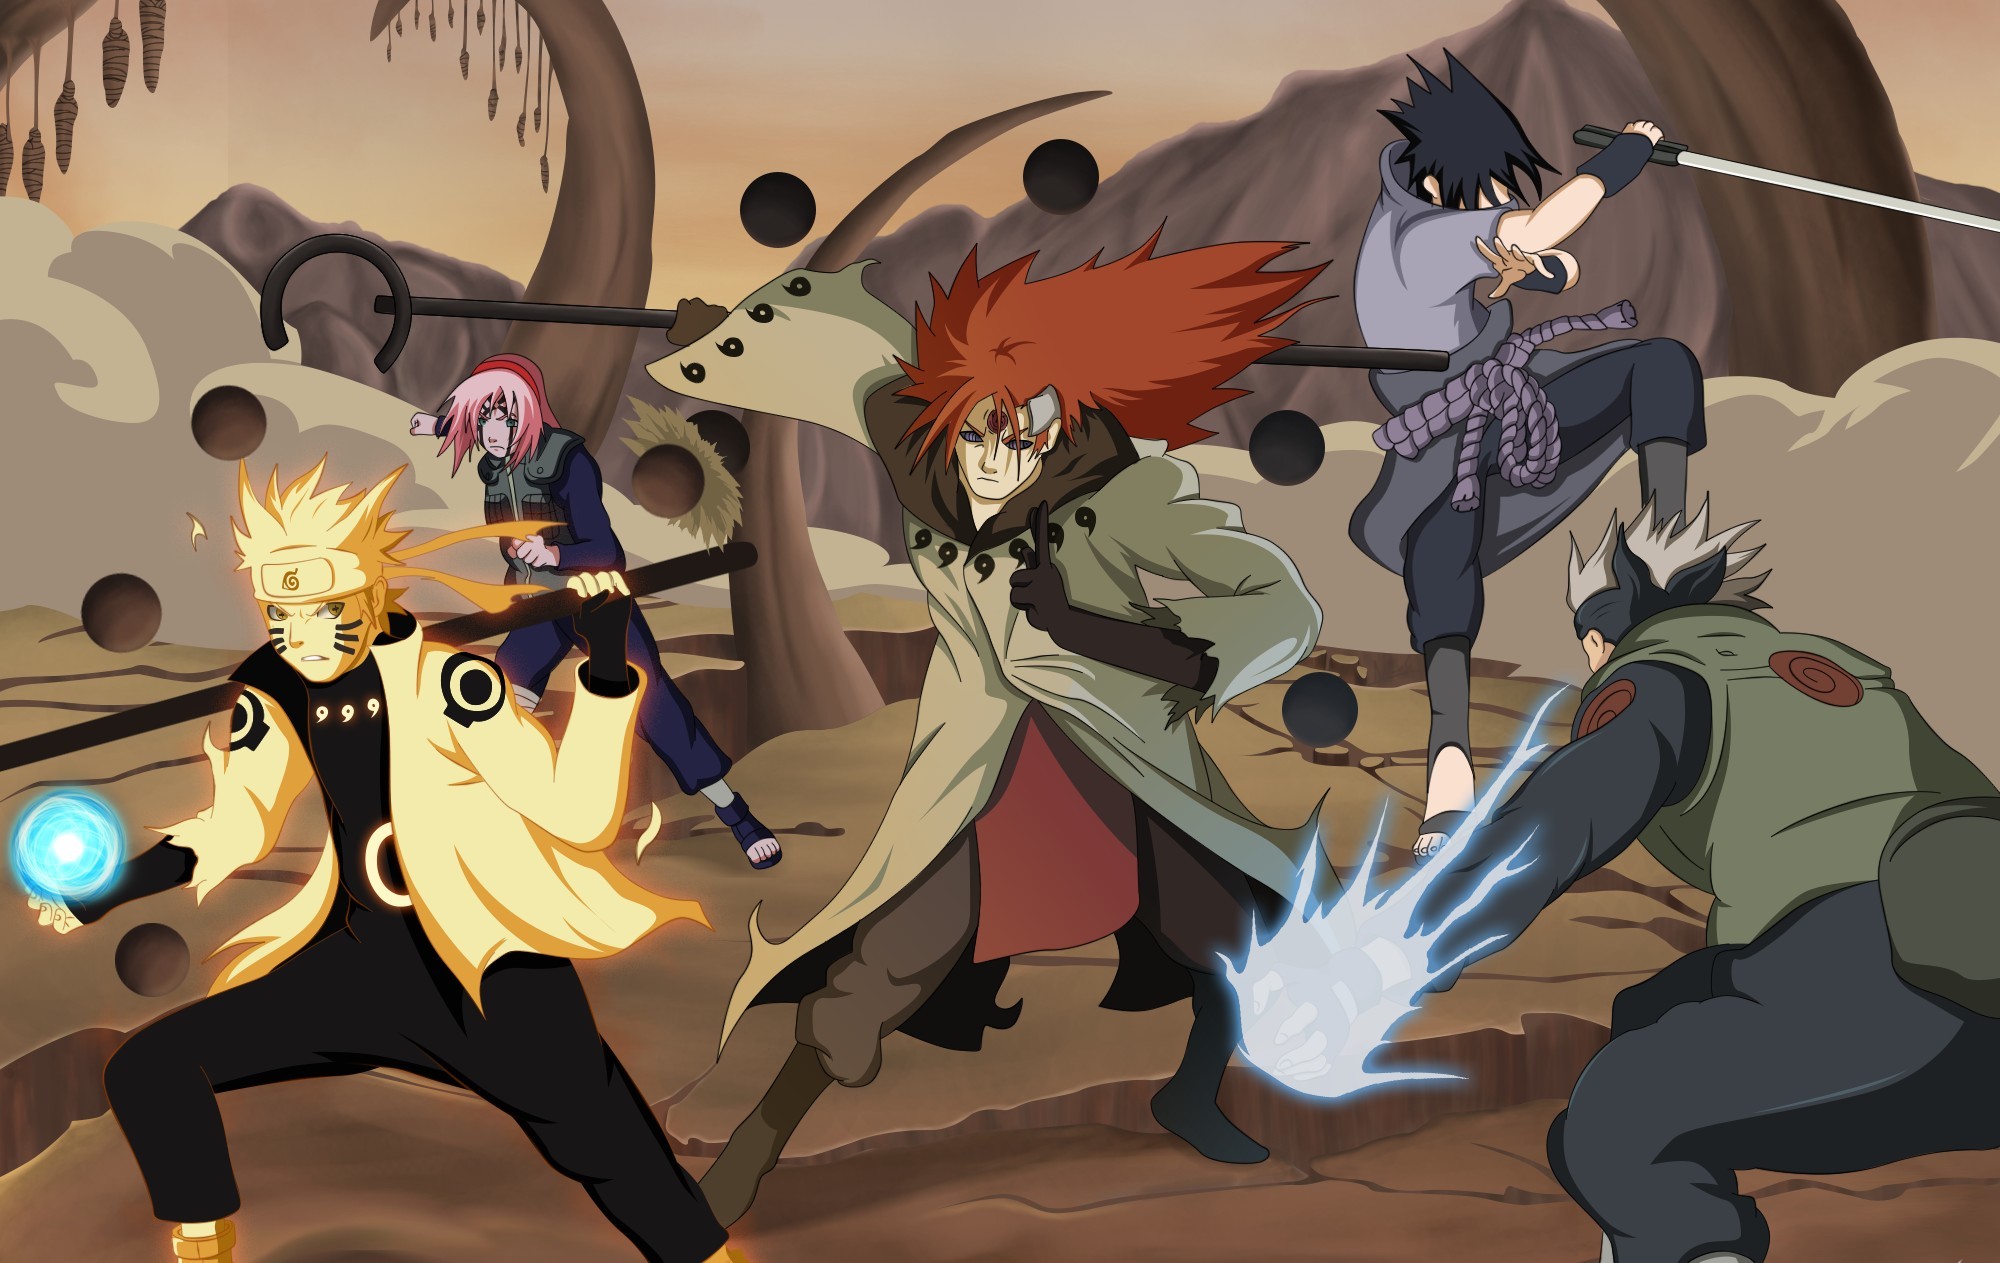 Narutoshippuden Images  Photos, videos, logos, illustrations and